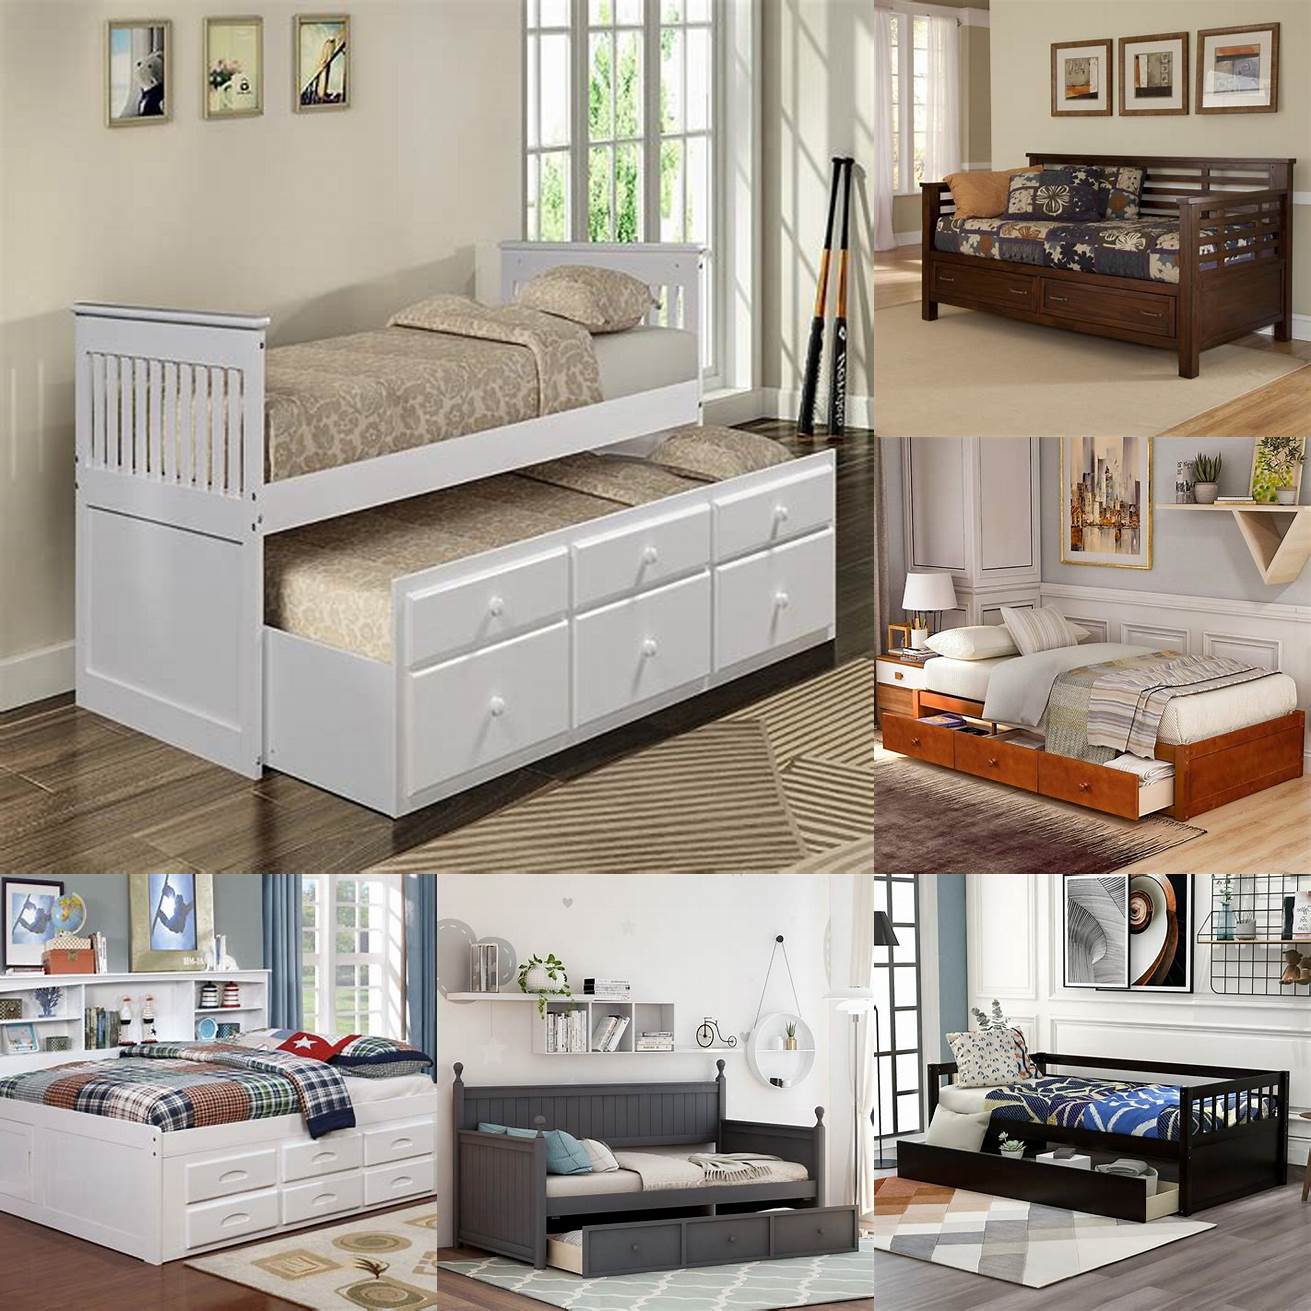 Wooden day bed with storage drawers